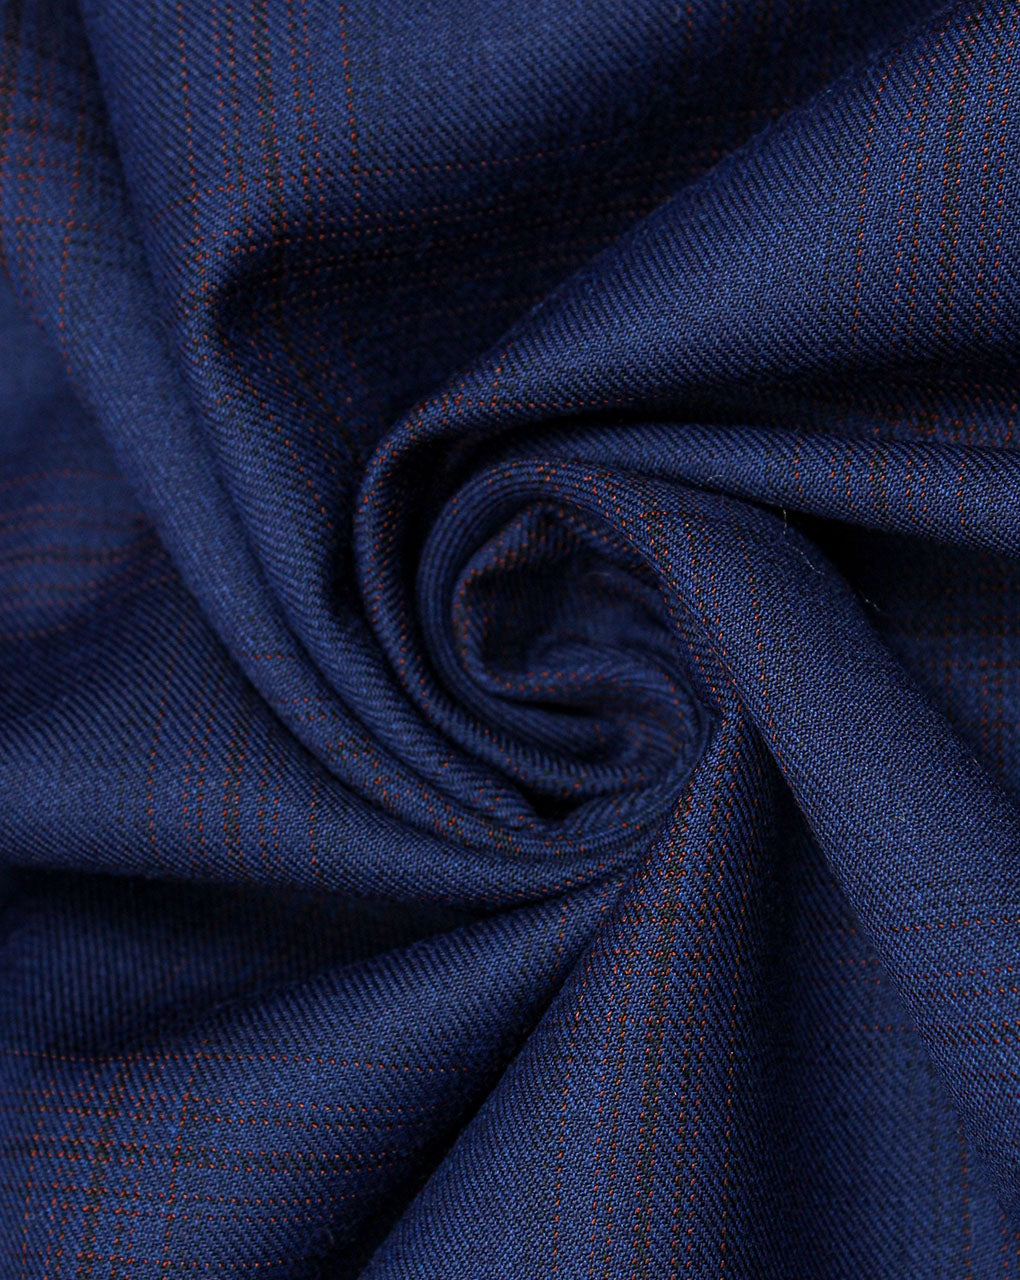 Blue And Orange Checks Woolen Suiting Fabric